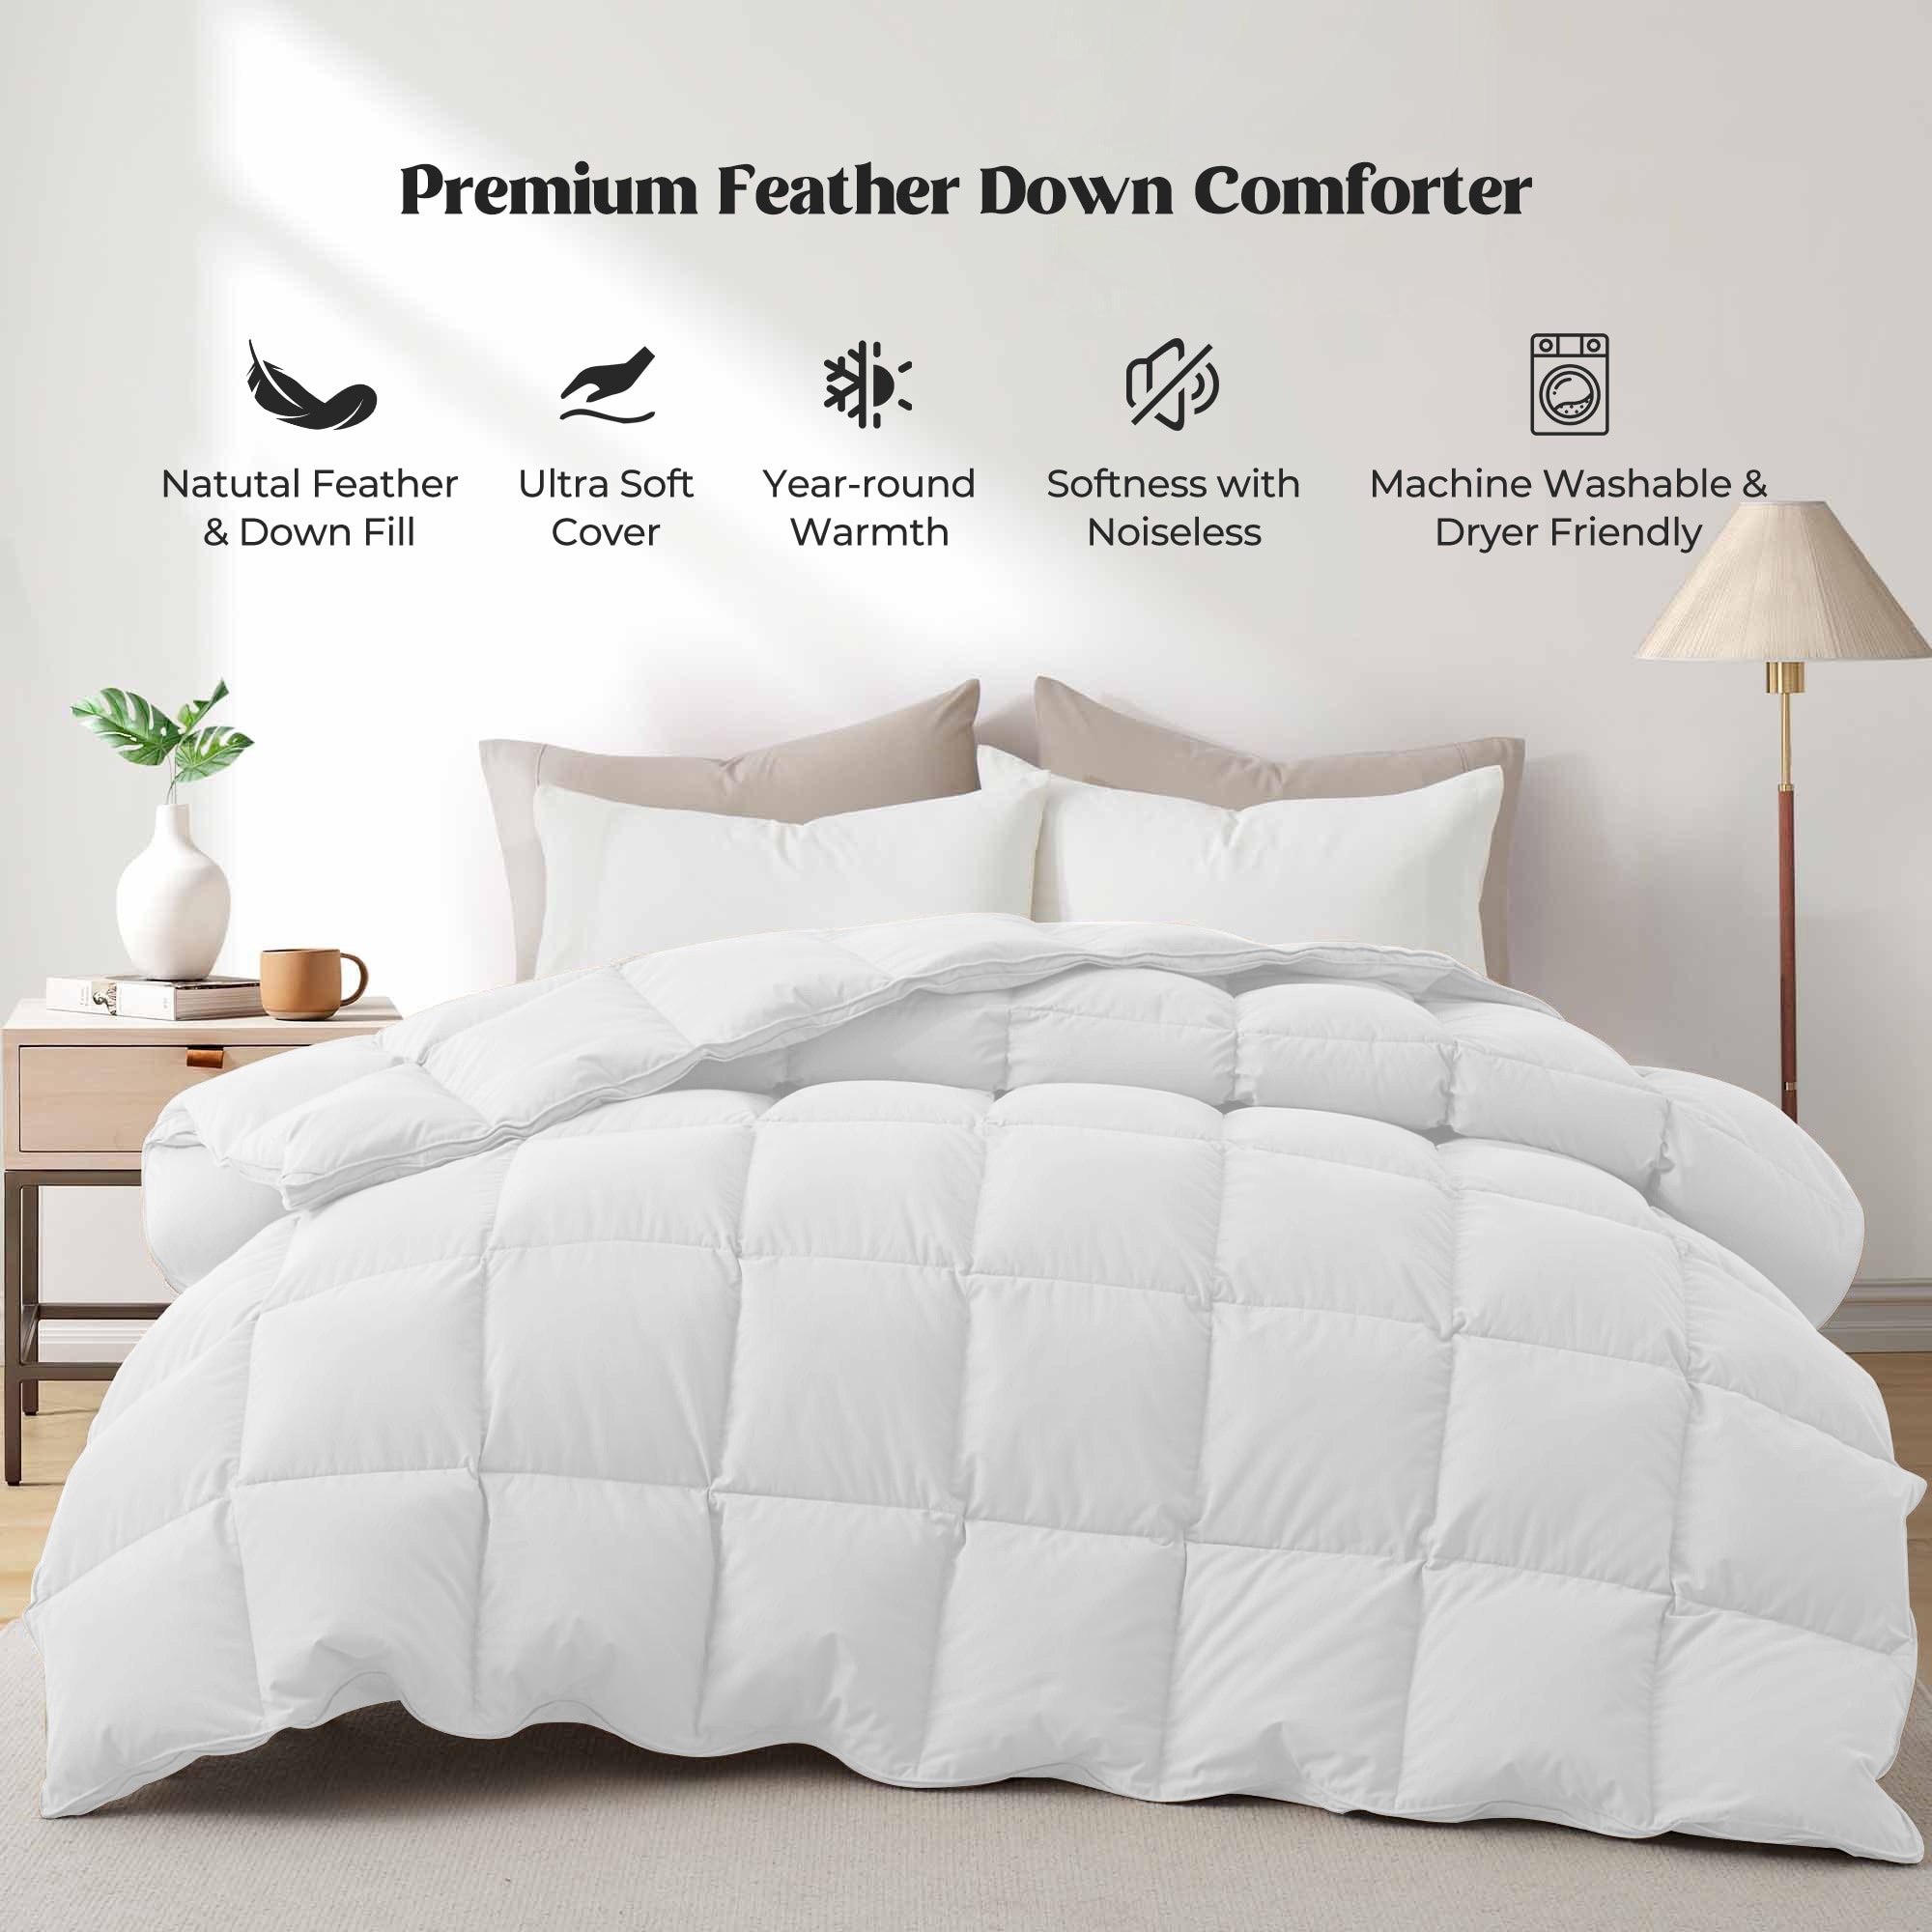 https://ak1.ostkcdn.com/images/products/is/images/direct/217238b18e2cc185b580d3ea2fcc1d56df49cd49/Lightweight%26-Year-round-White-Goose-Down-Duvet-Comforter.jpg